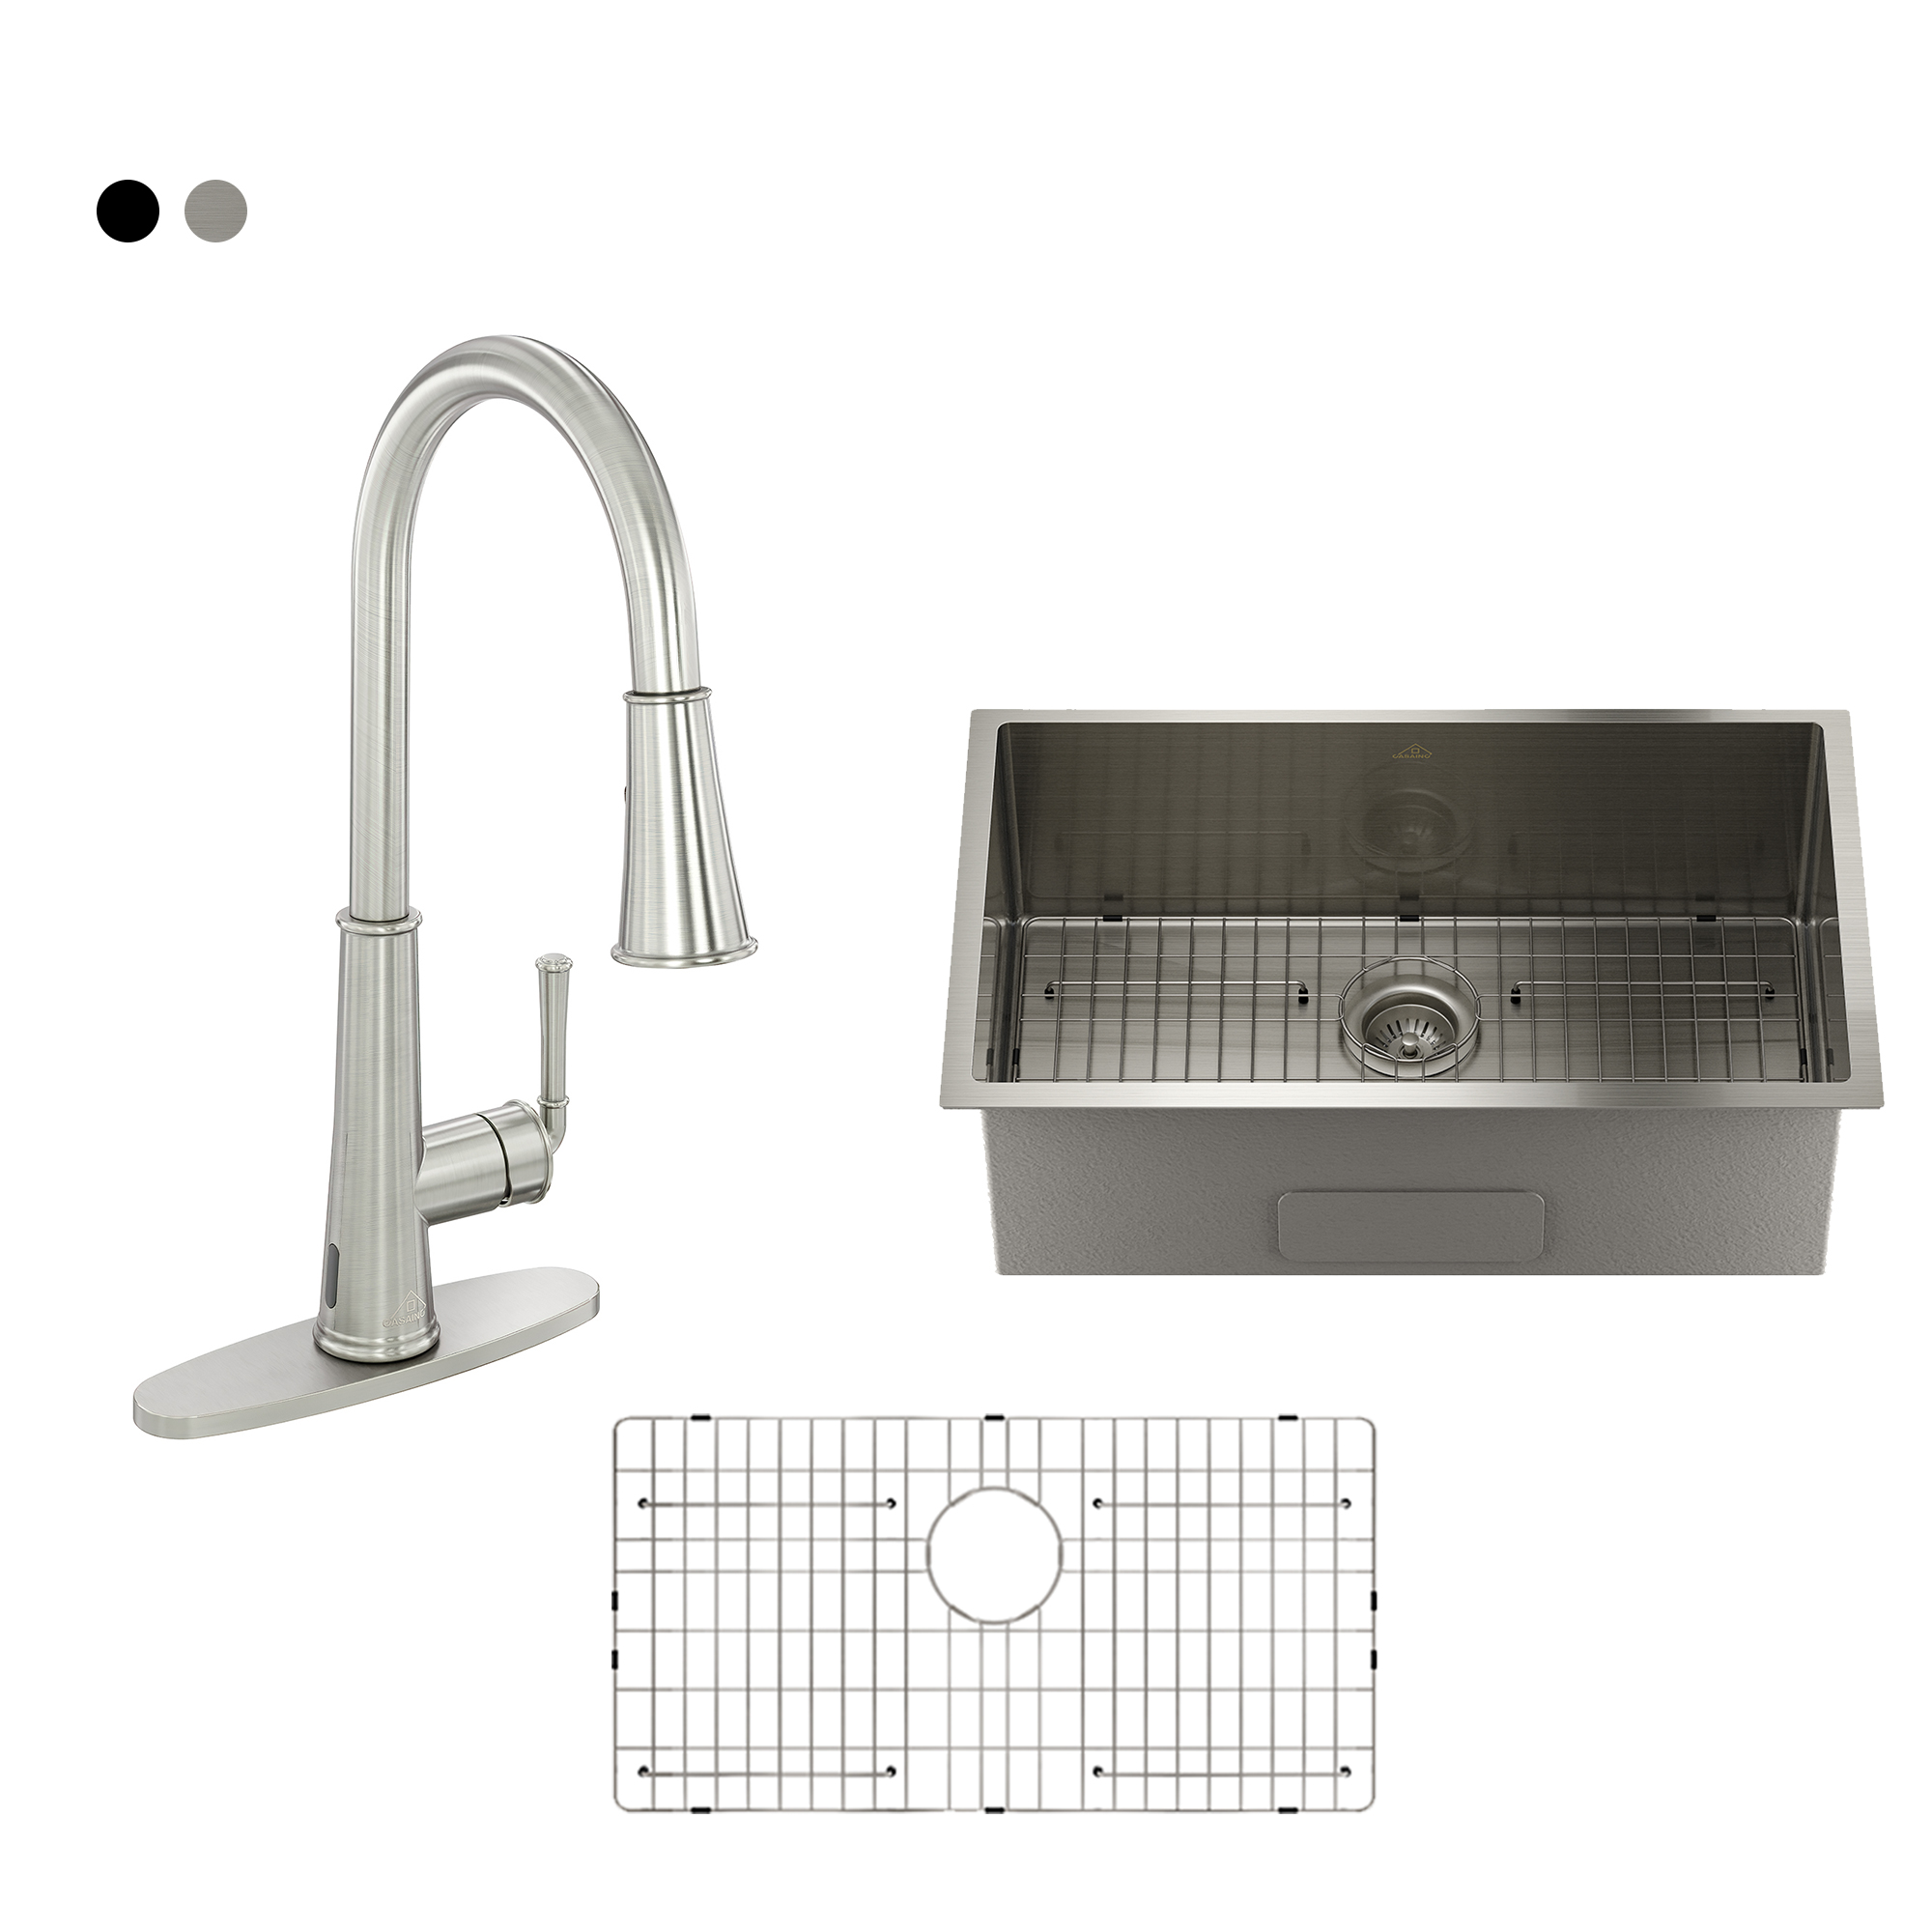 Undermount Stainless Steel 32-inch Single Bowl Kitchen Sink in Brushed with LED and Infrared Sensor Kitchen Faucet